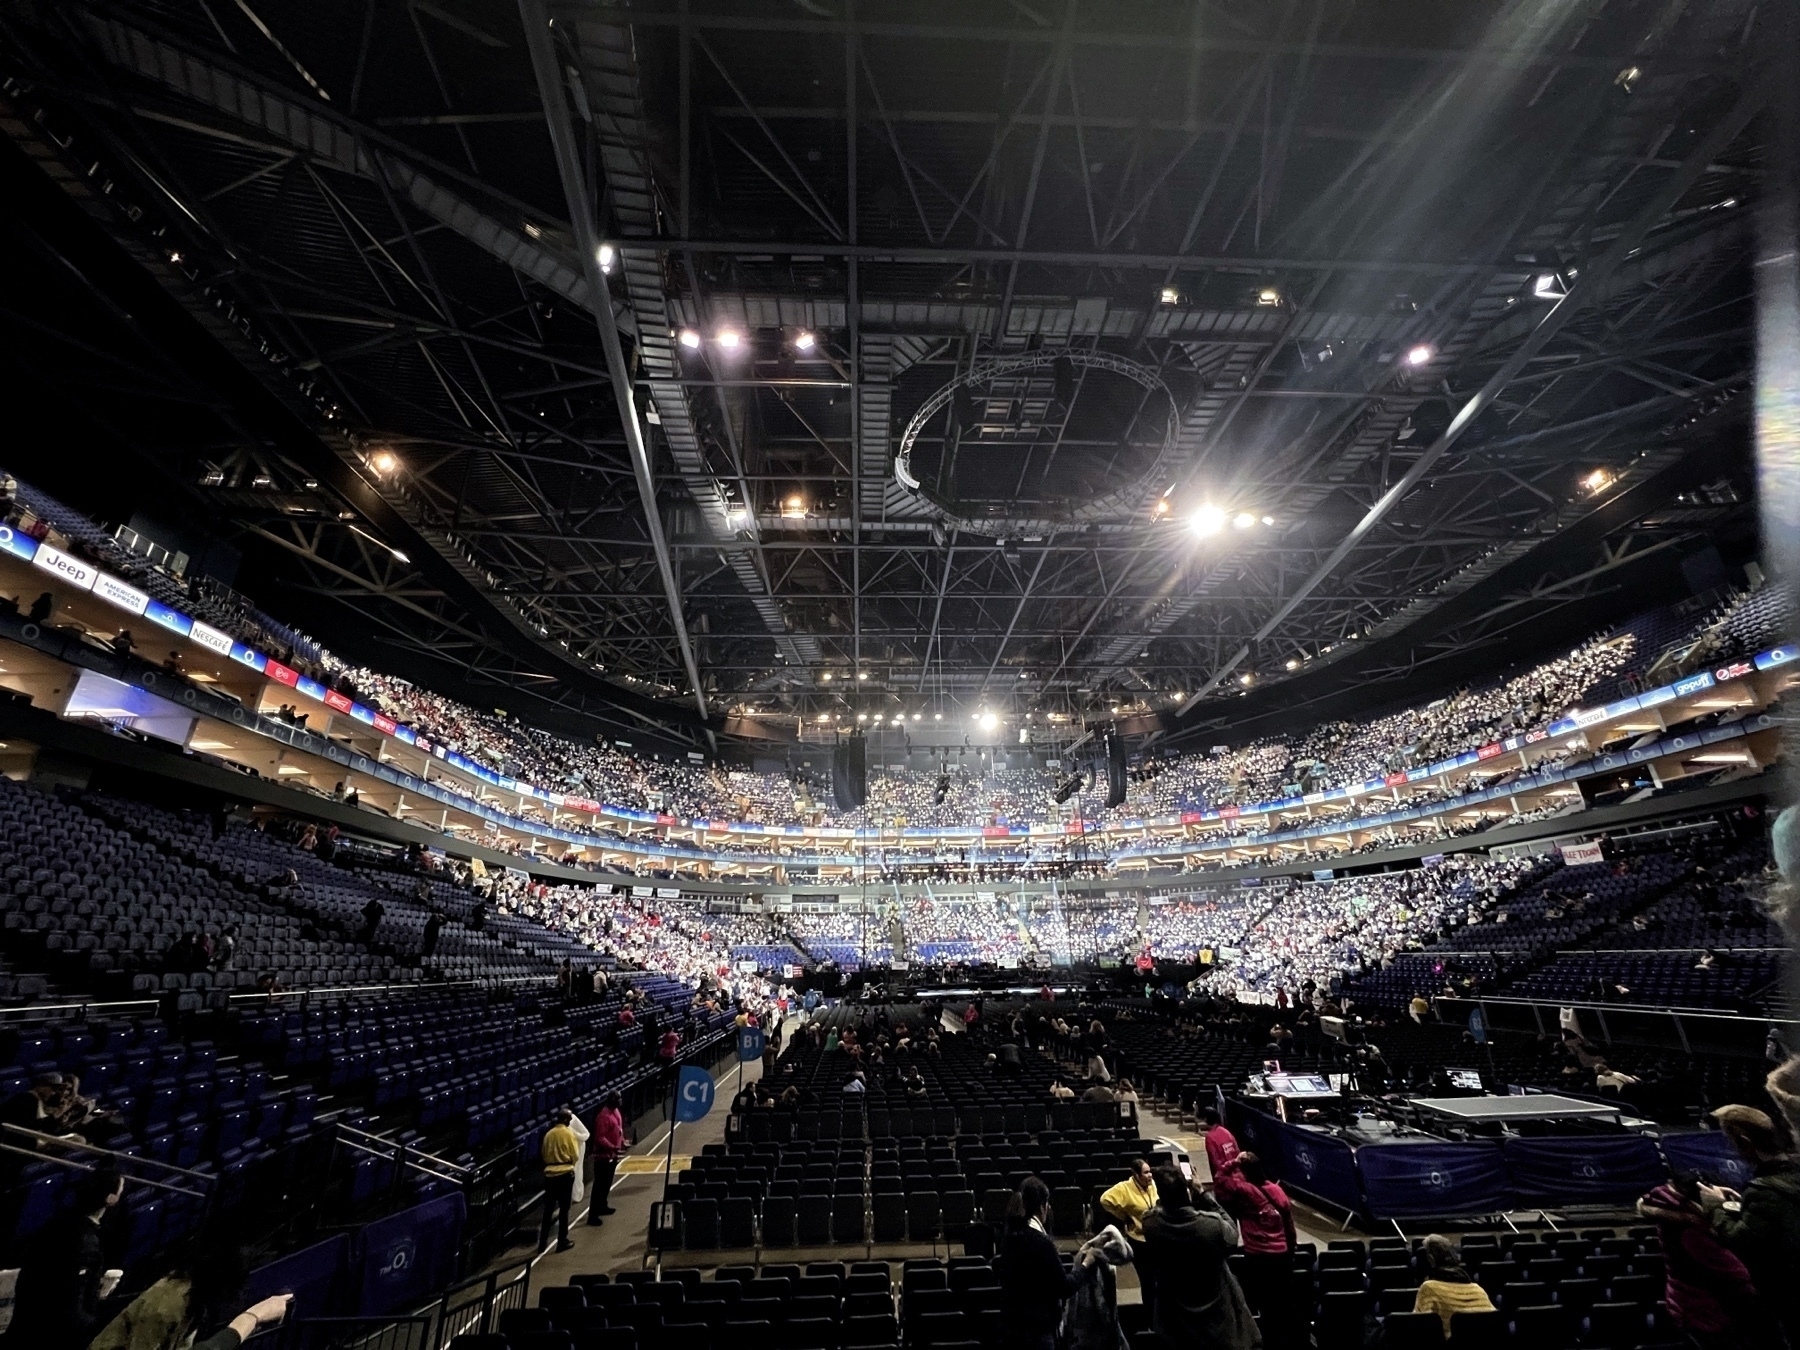 The Young Voices choir at the O2 Arena